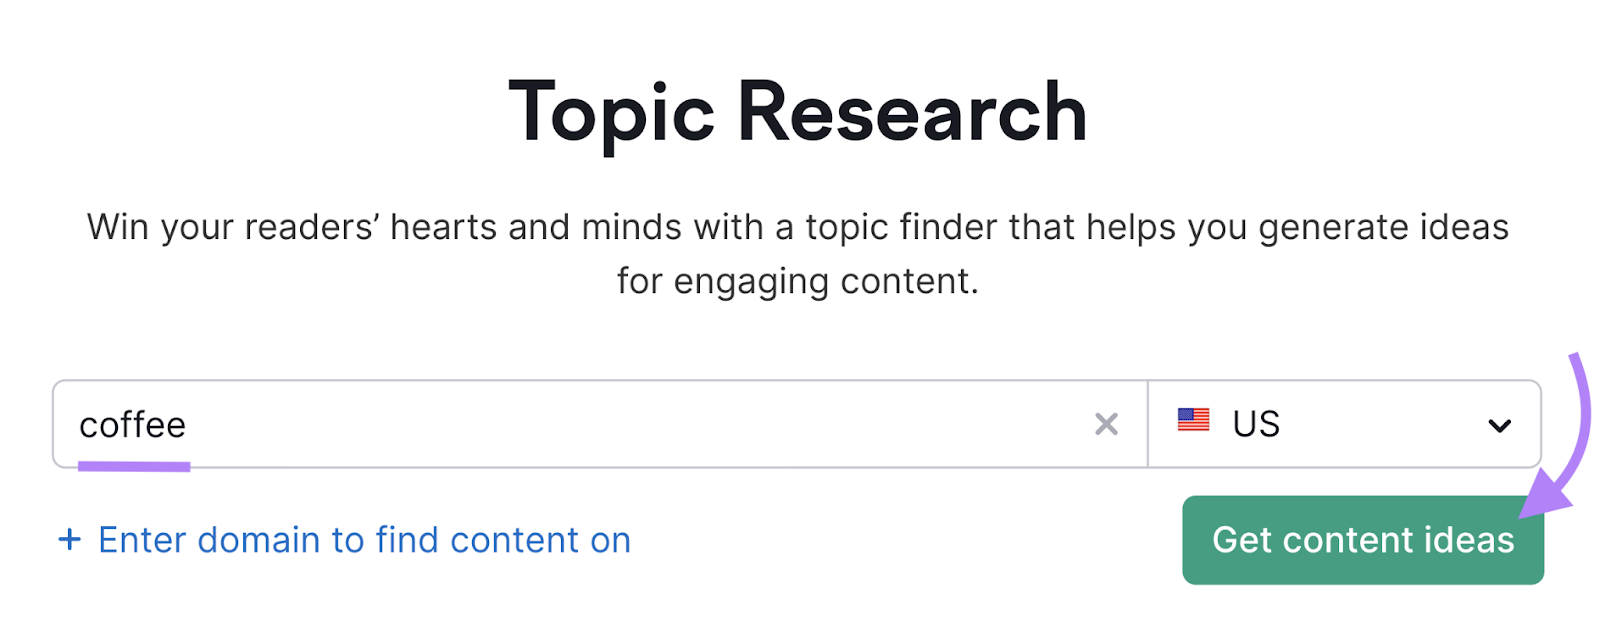 "coffee" entered into the Topic Research search bar